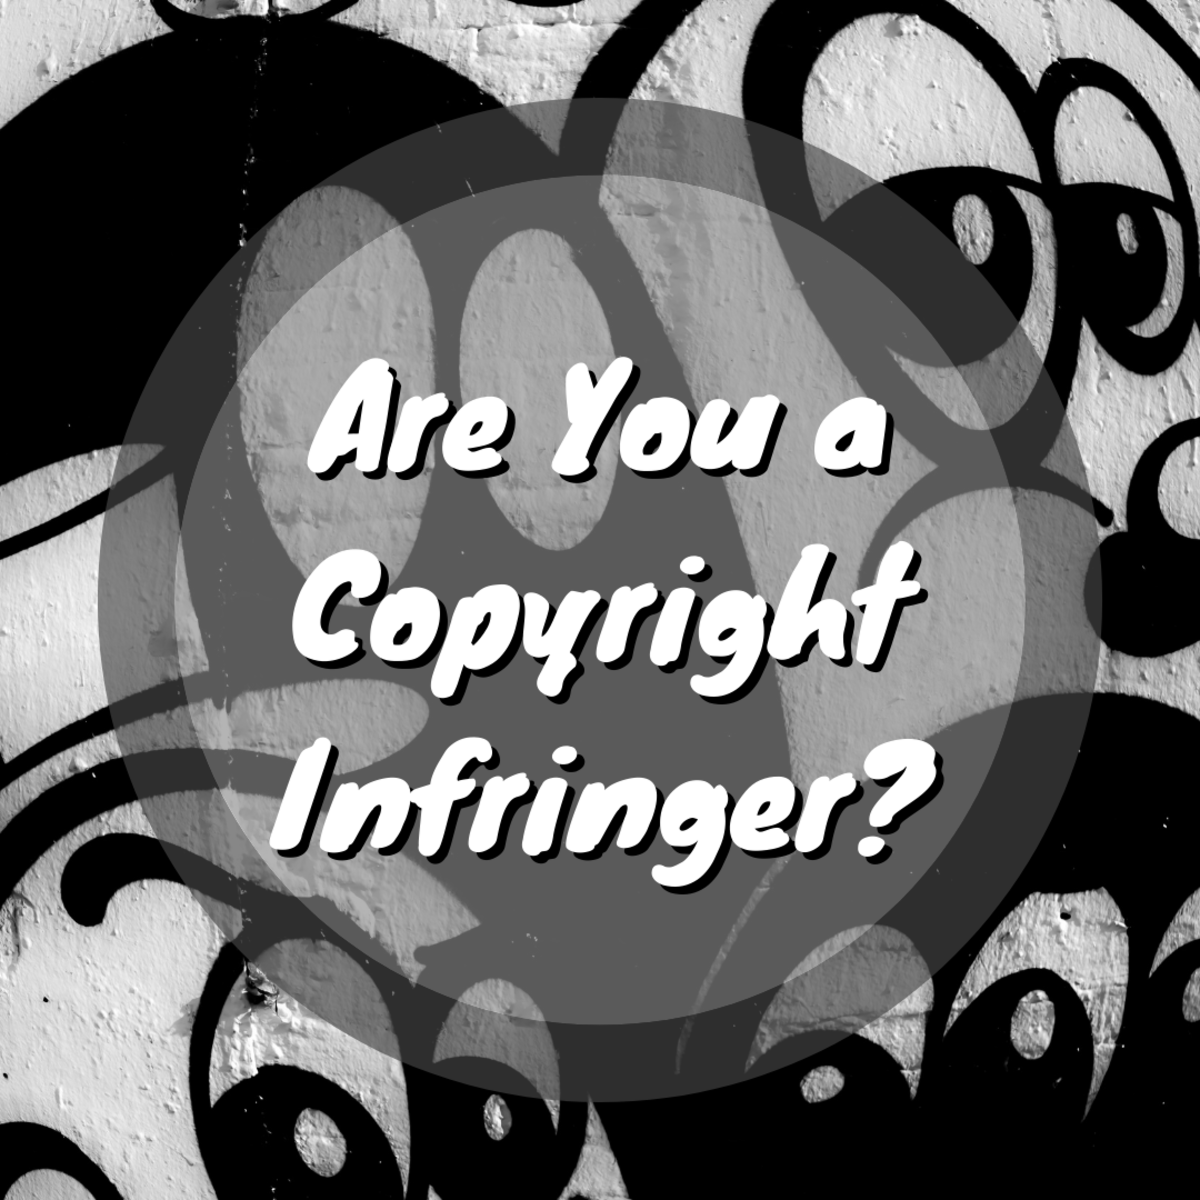 I Found It on Google! Are You a Copyright Infringer?